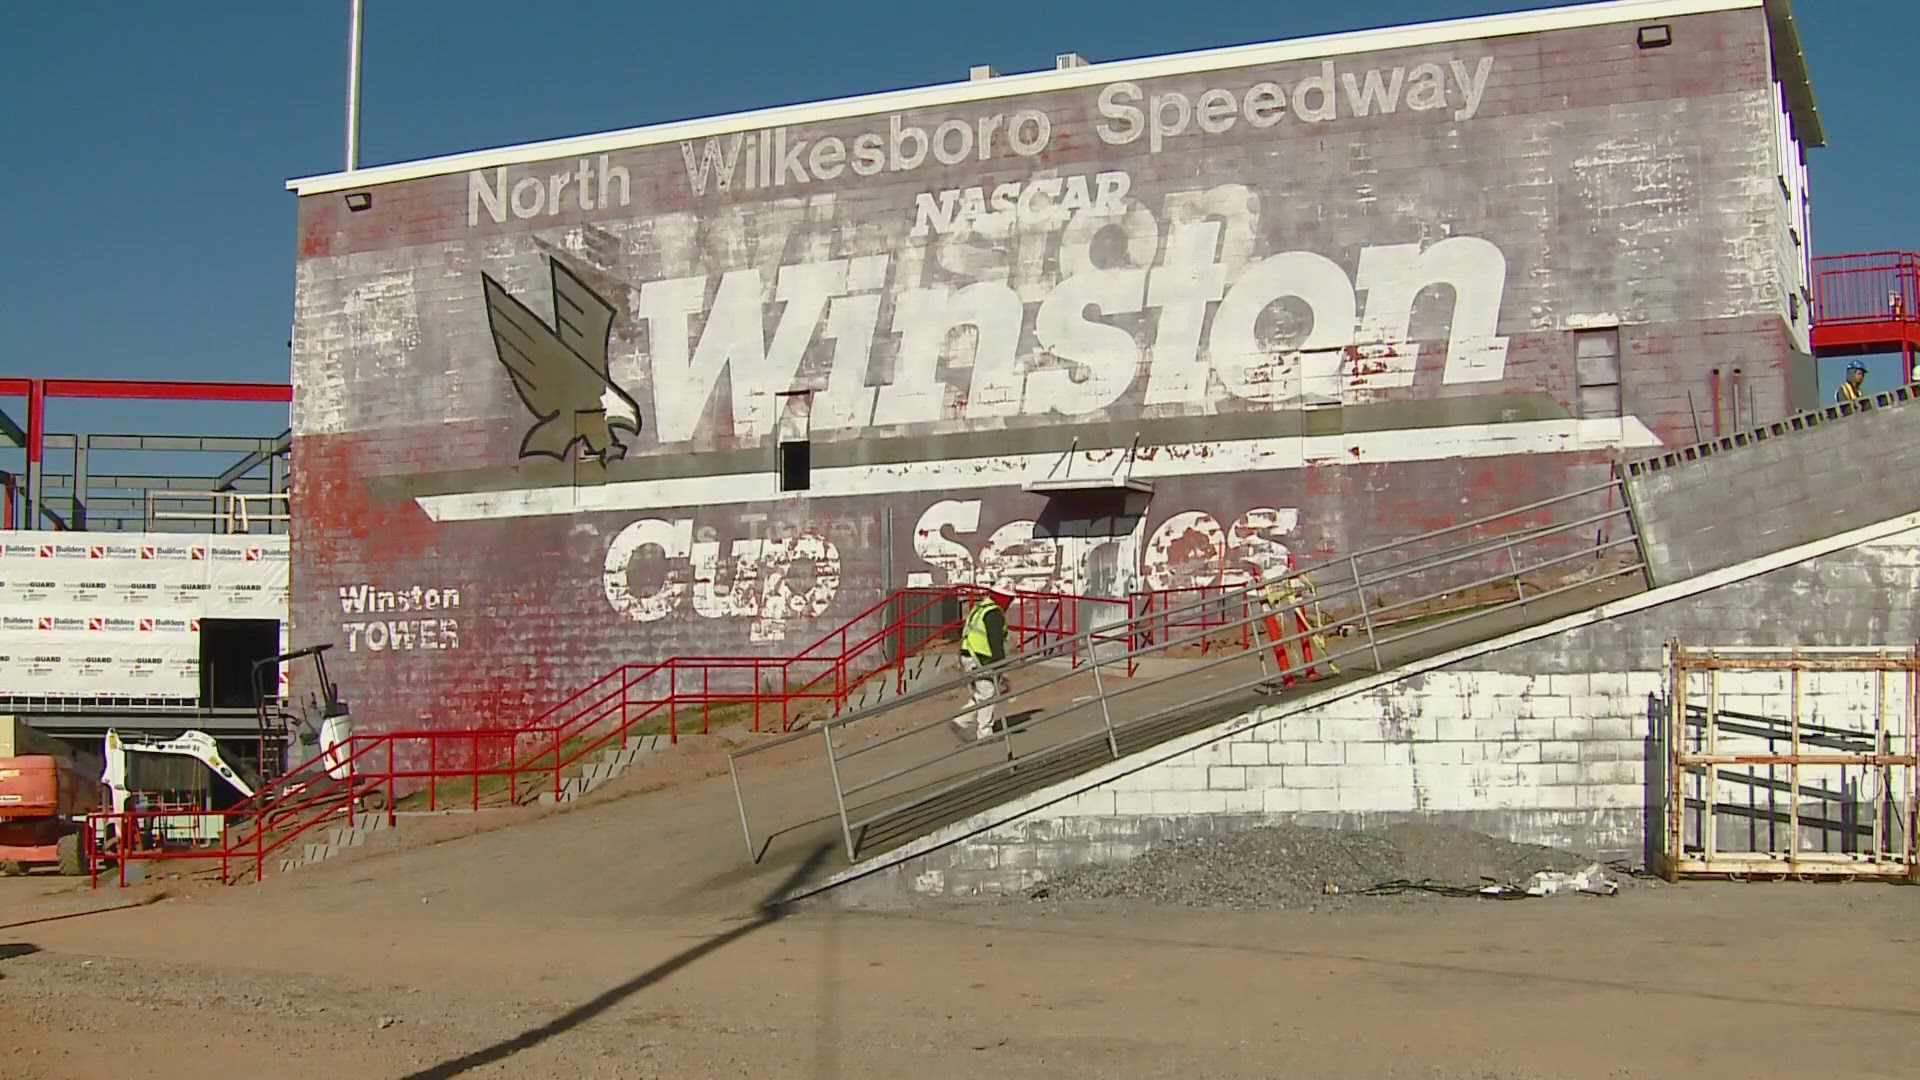 NASCAR comes back to the Speedway for the first time in almost three decades May 19-21.